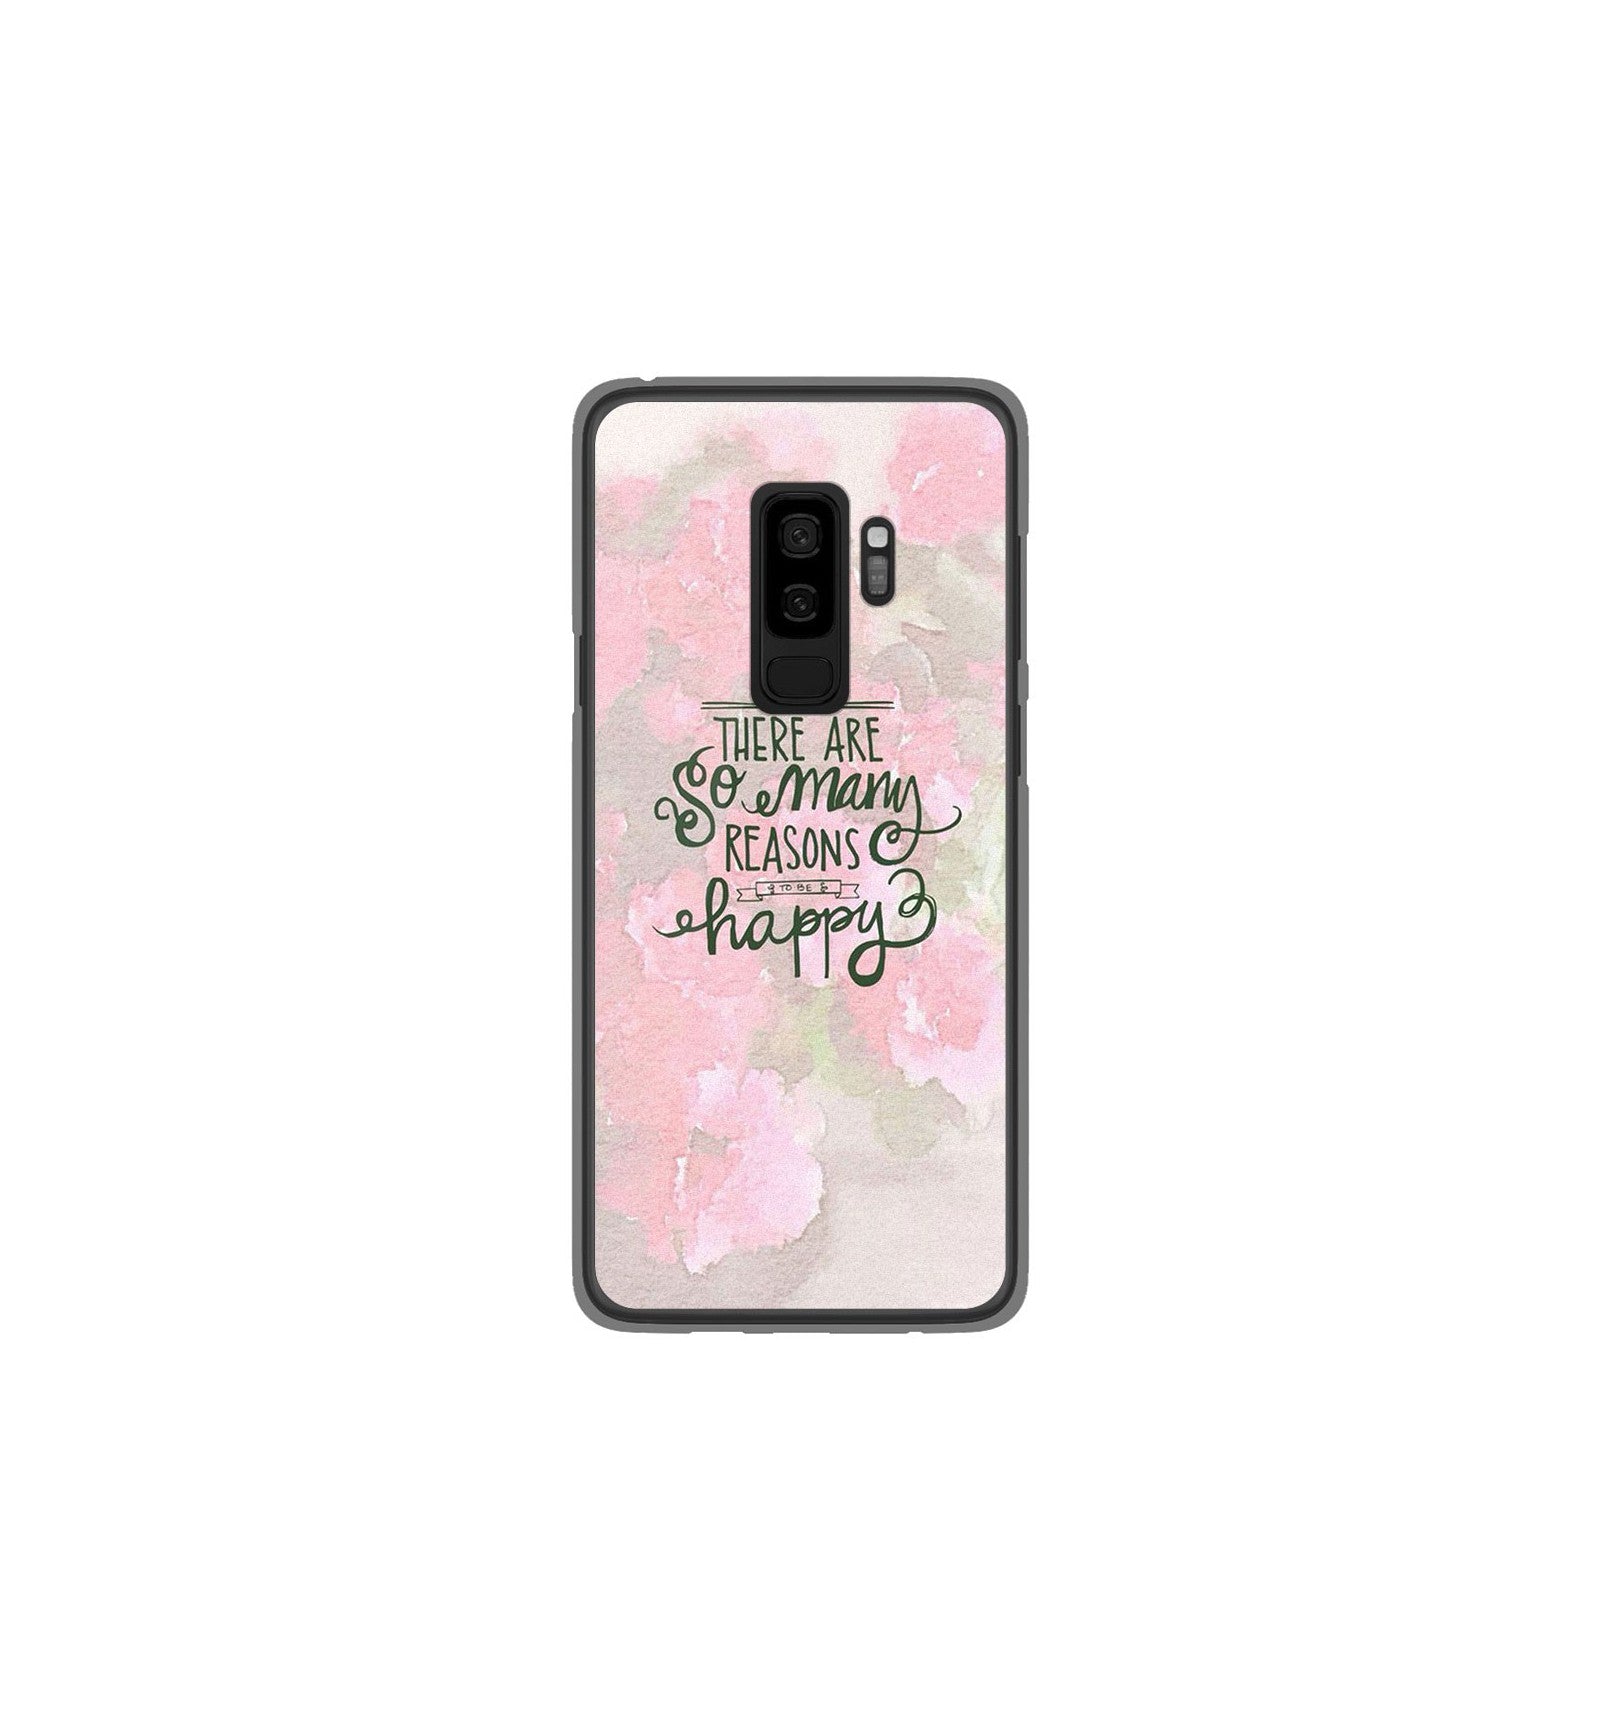 coque samsung s9 girly